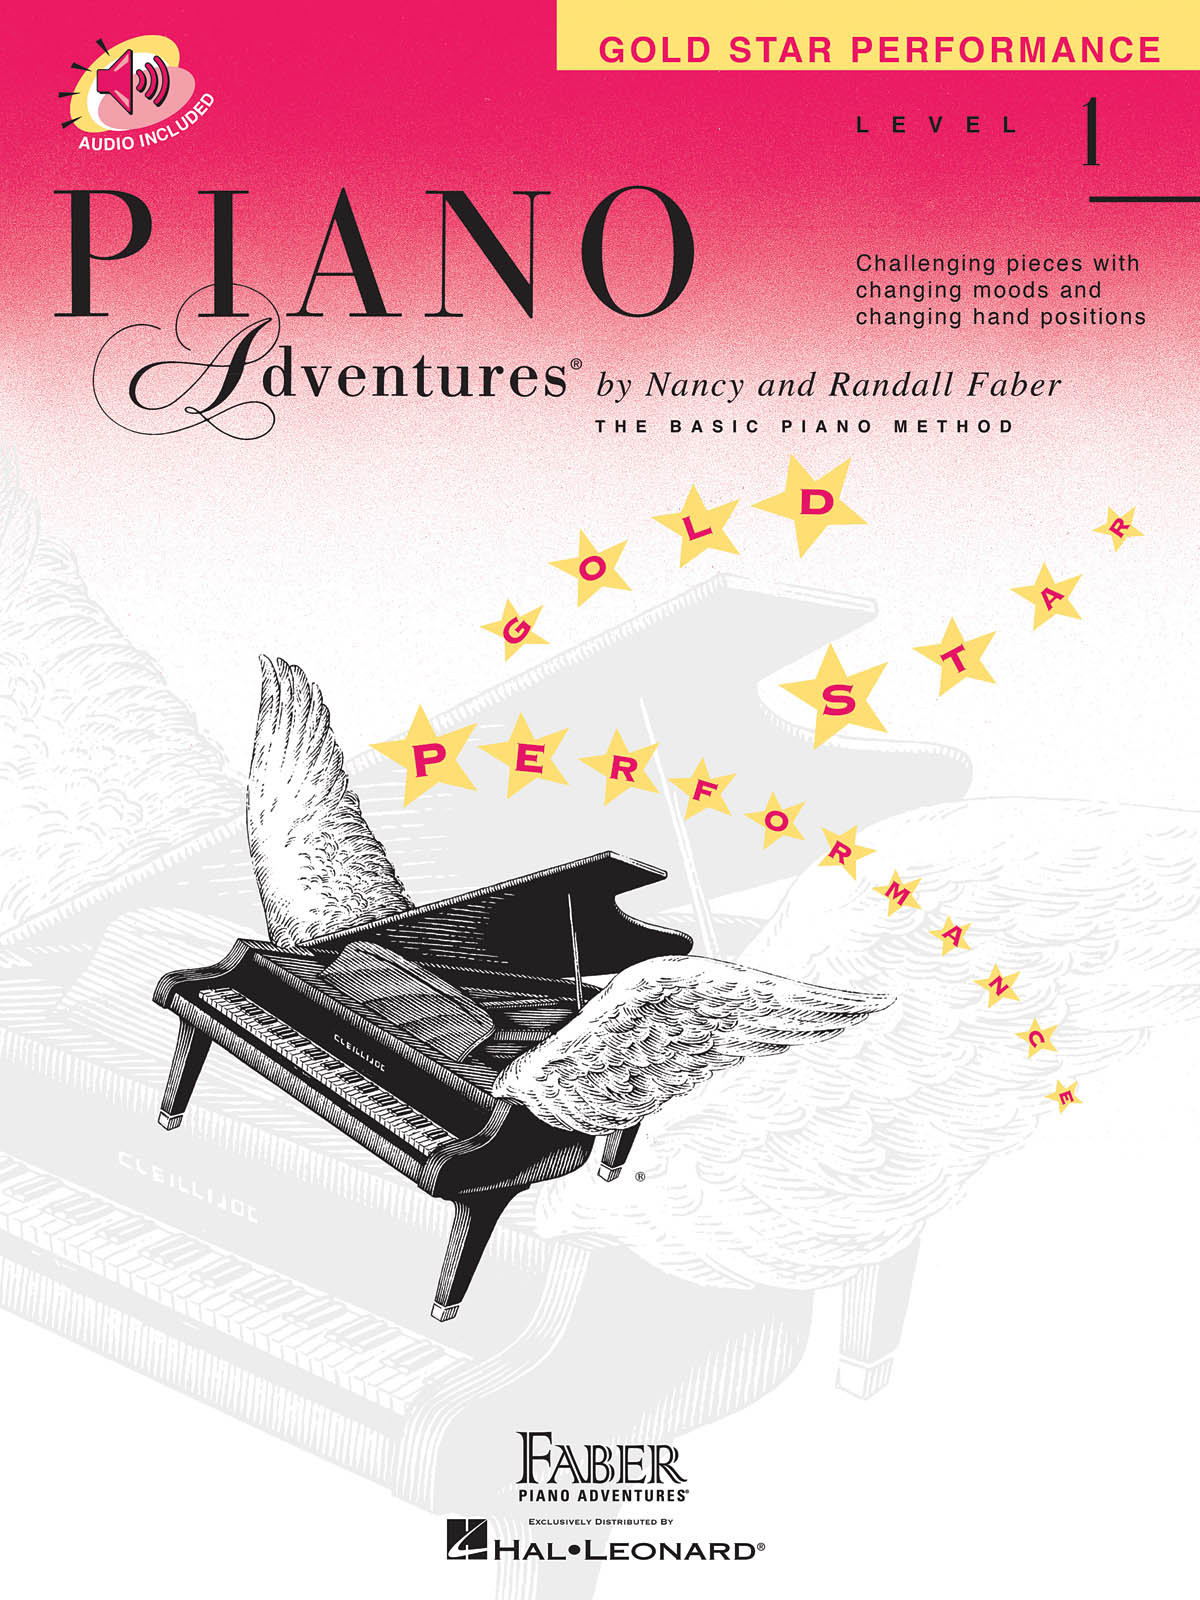 Faber Piano Adventures: Level 1 Gold Star Performance